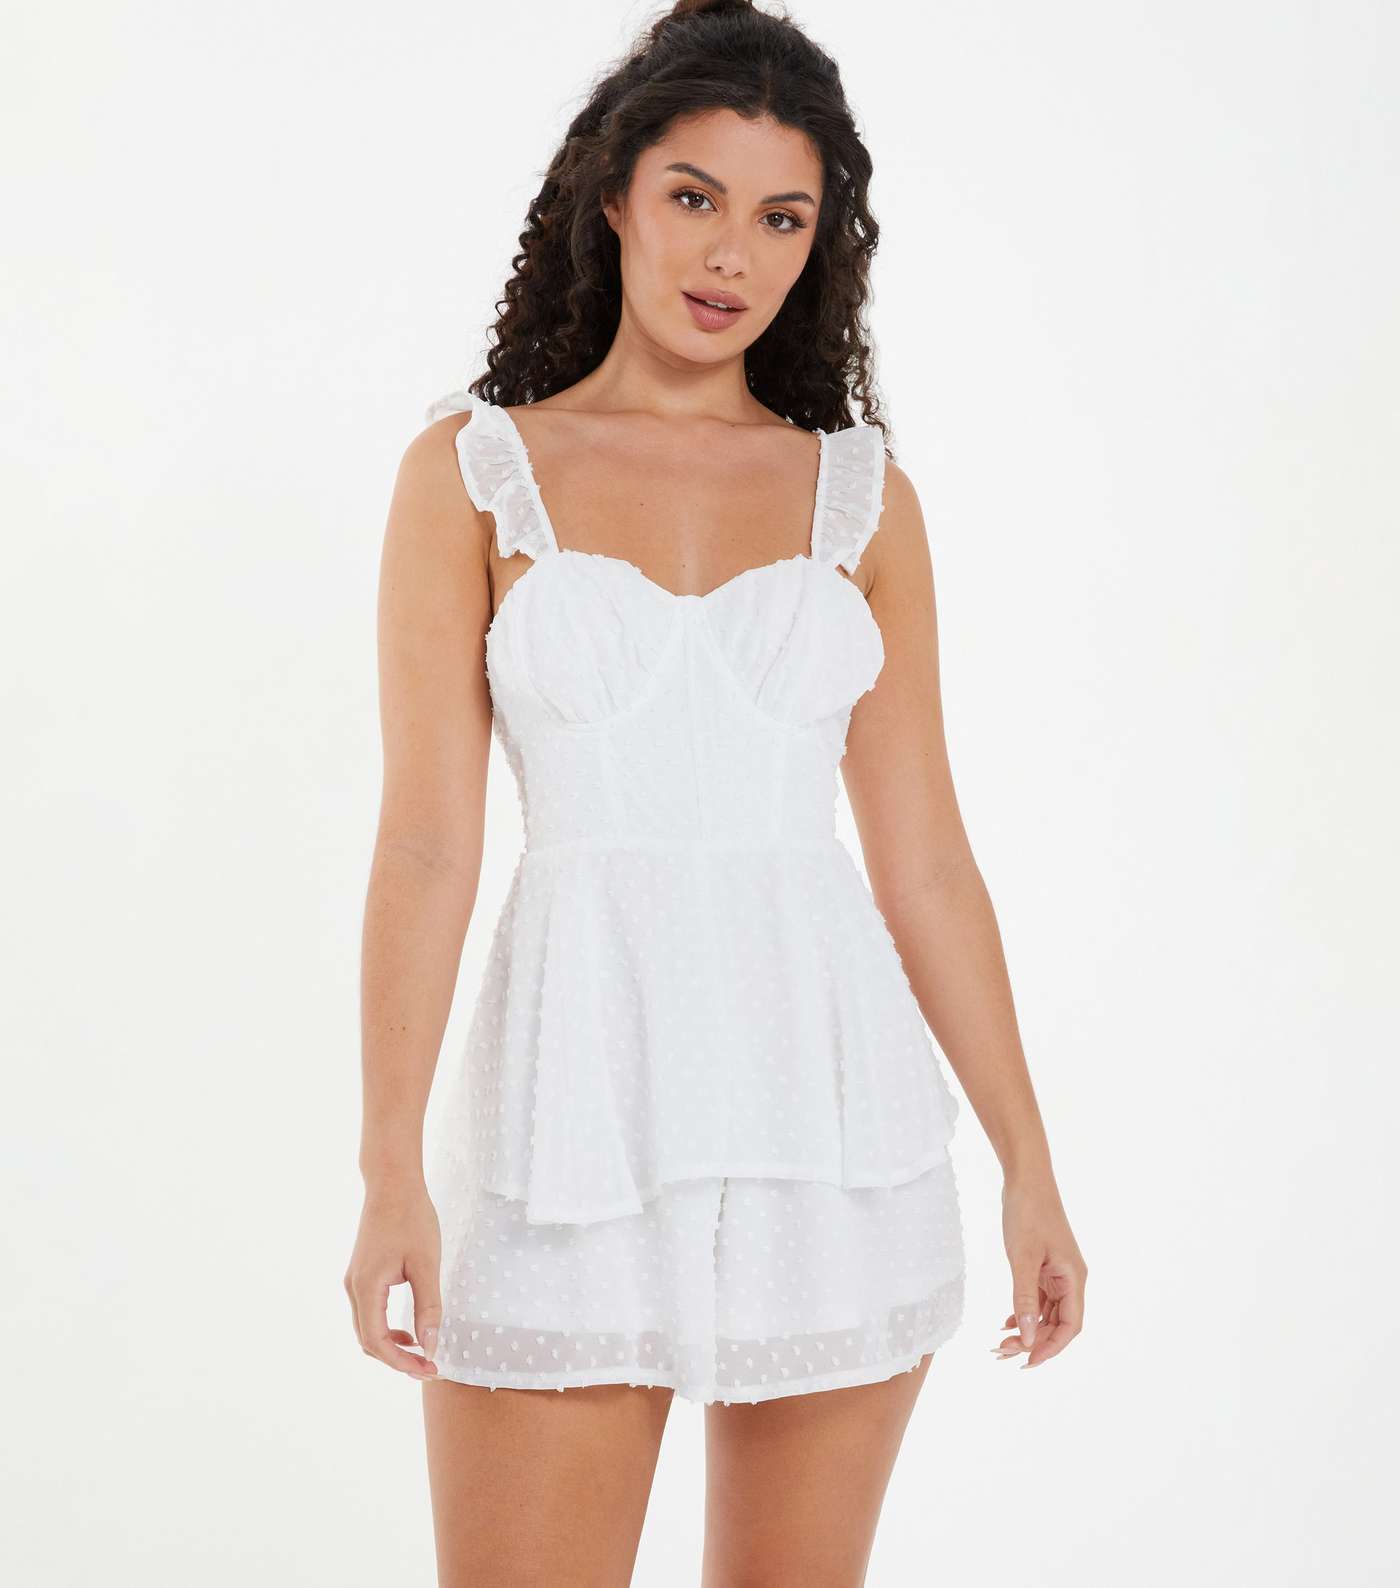 QUIZ White Frill Strappy Playsuit